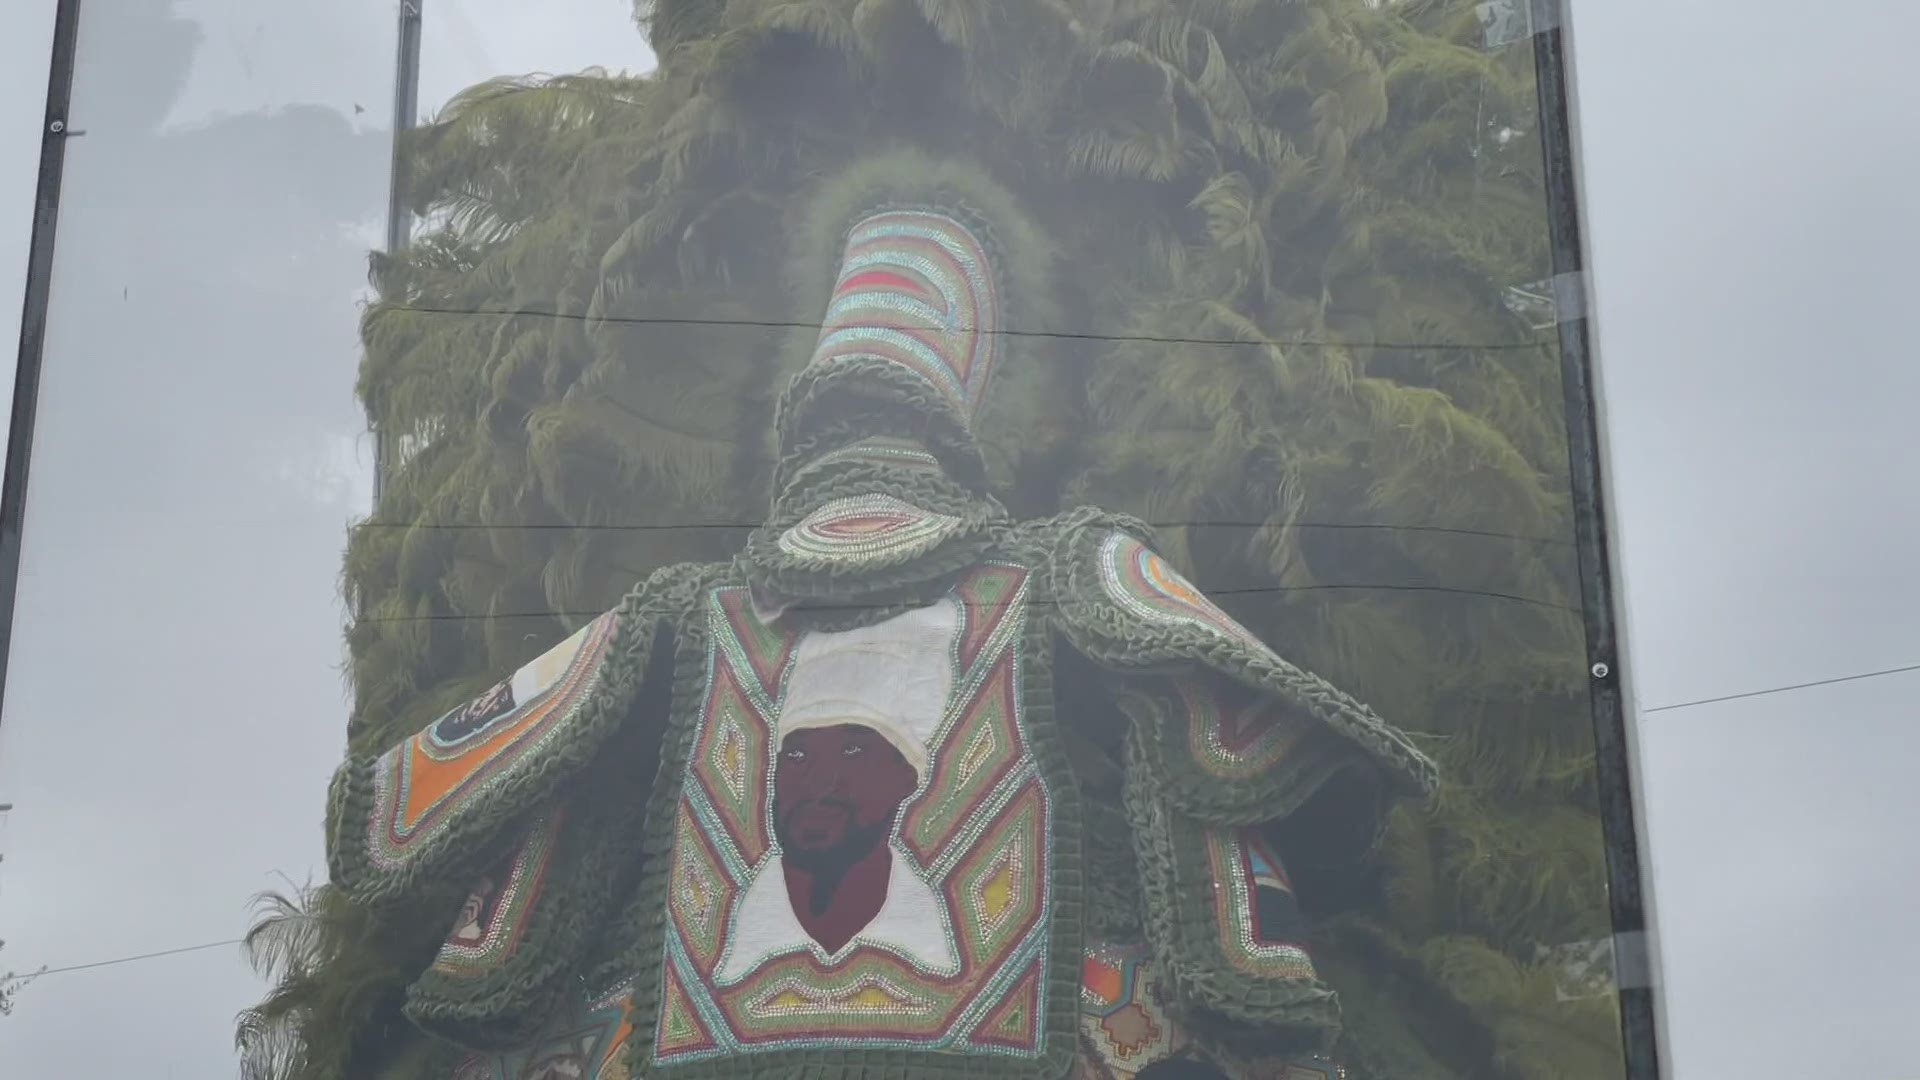 A Mardi Gras Indian suit encased in a protective closure was placed at the site of the old Jefferson Davis monument and could be seen by all Tuesday.